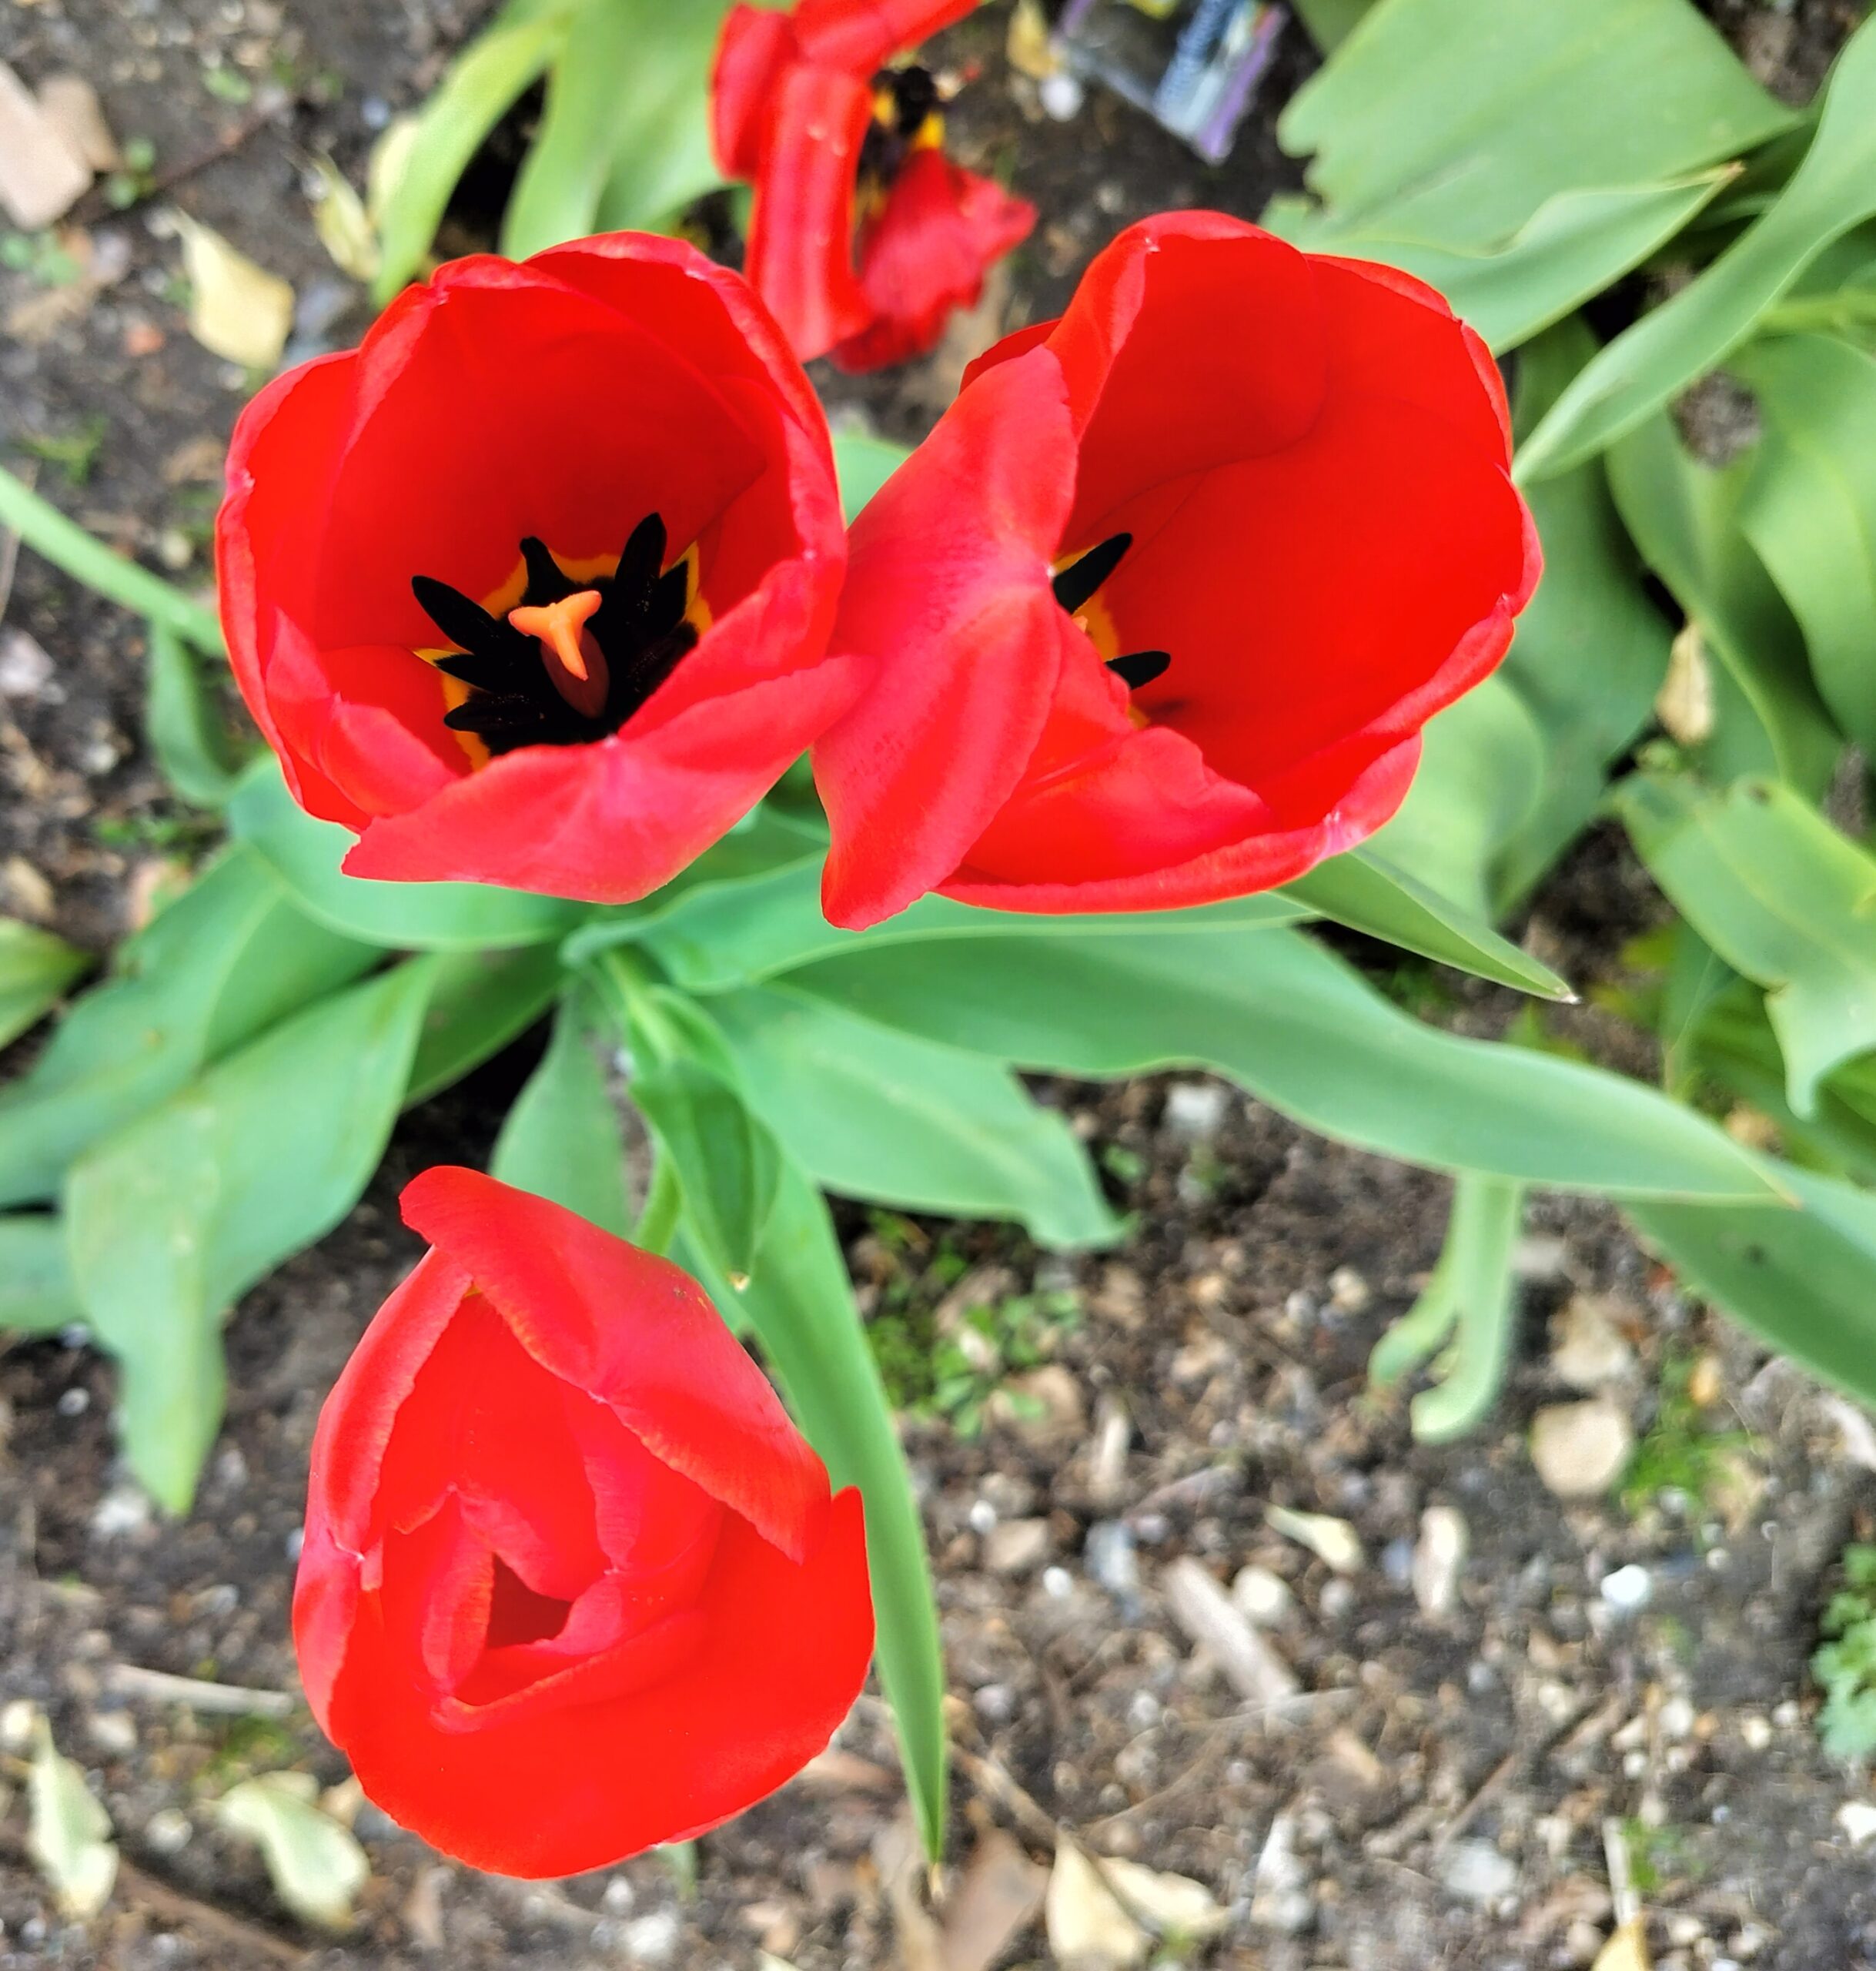 Blooming Beauty: Capturing Red Tulips in Spring